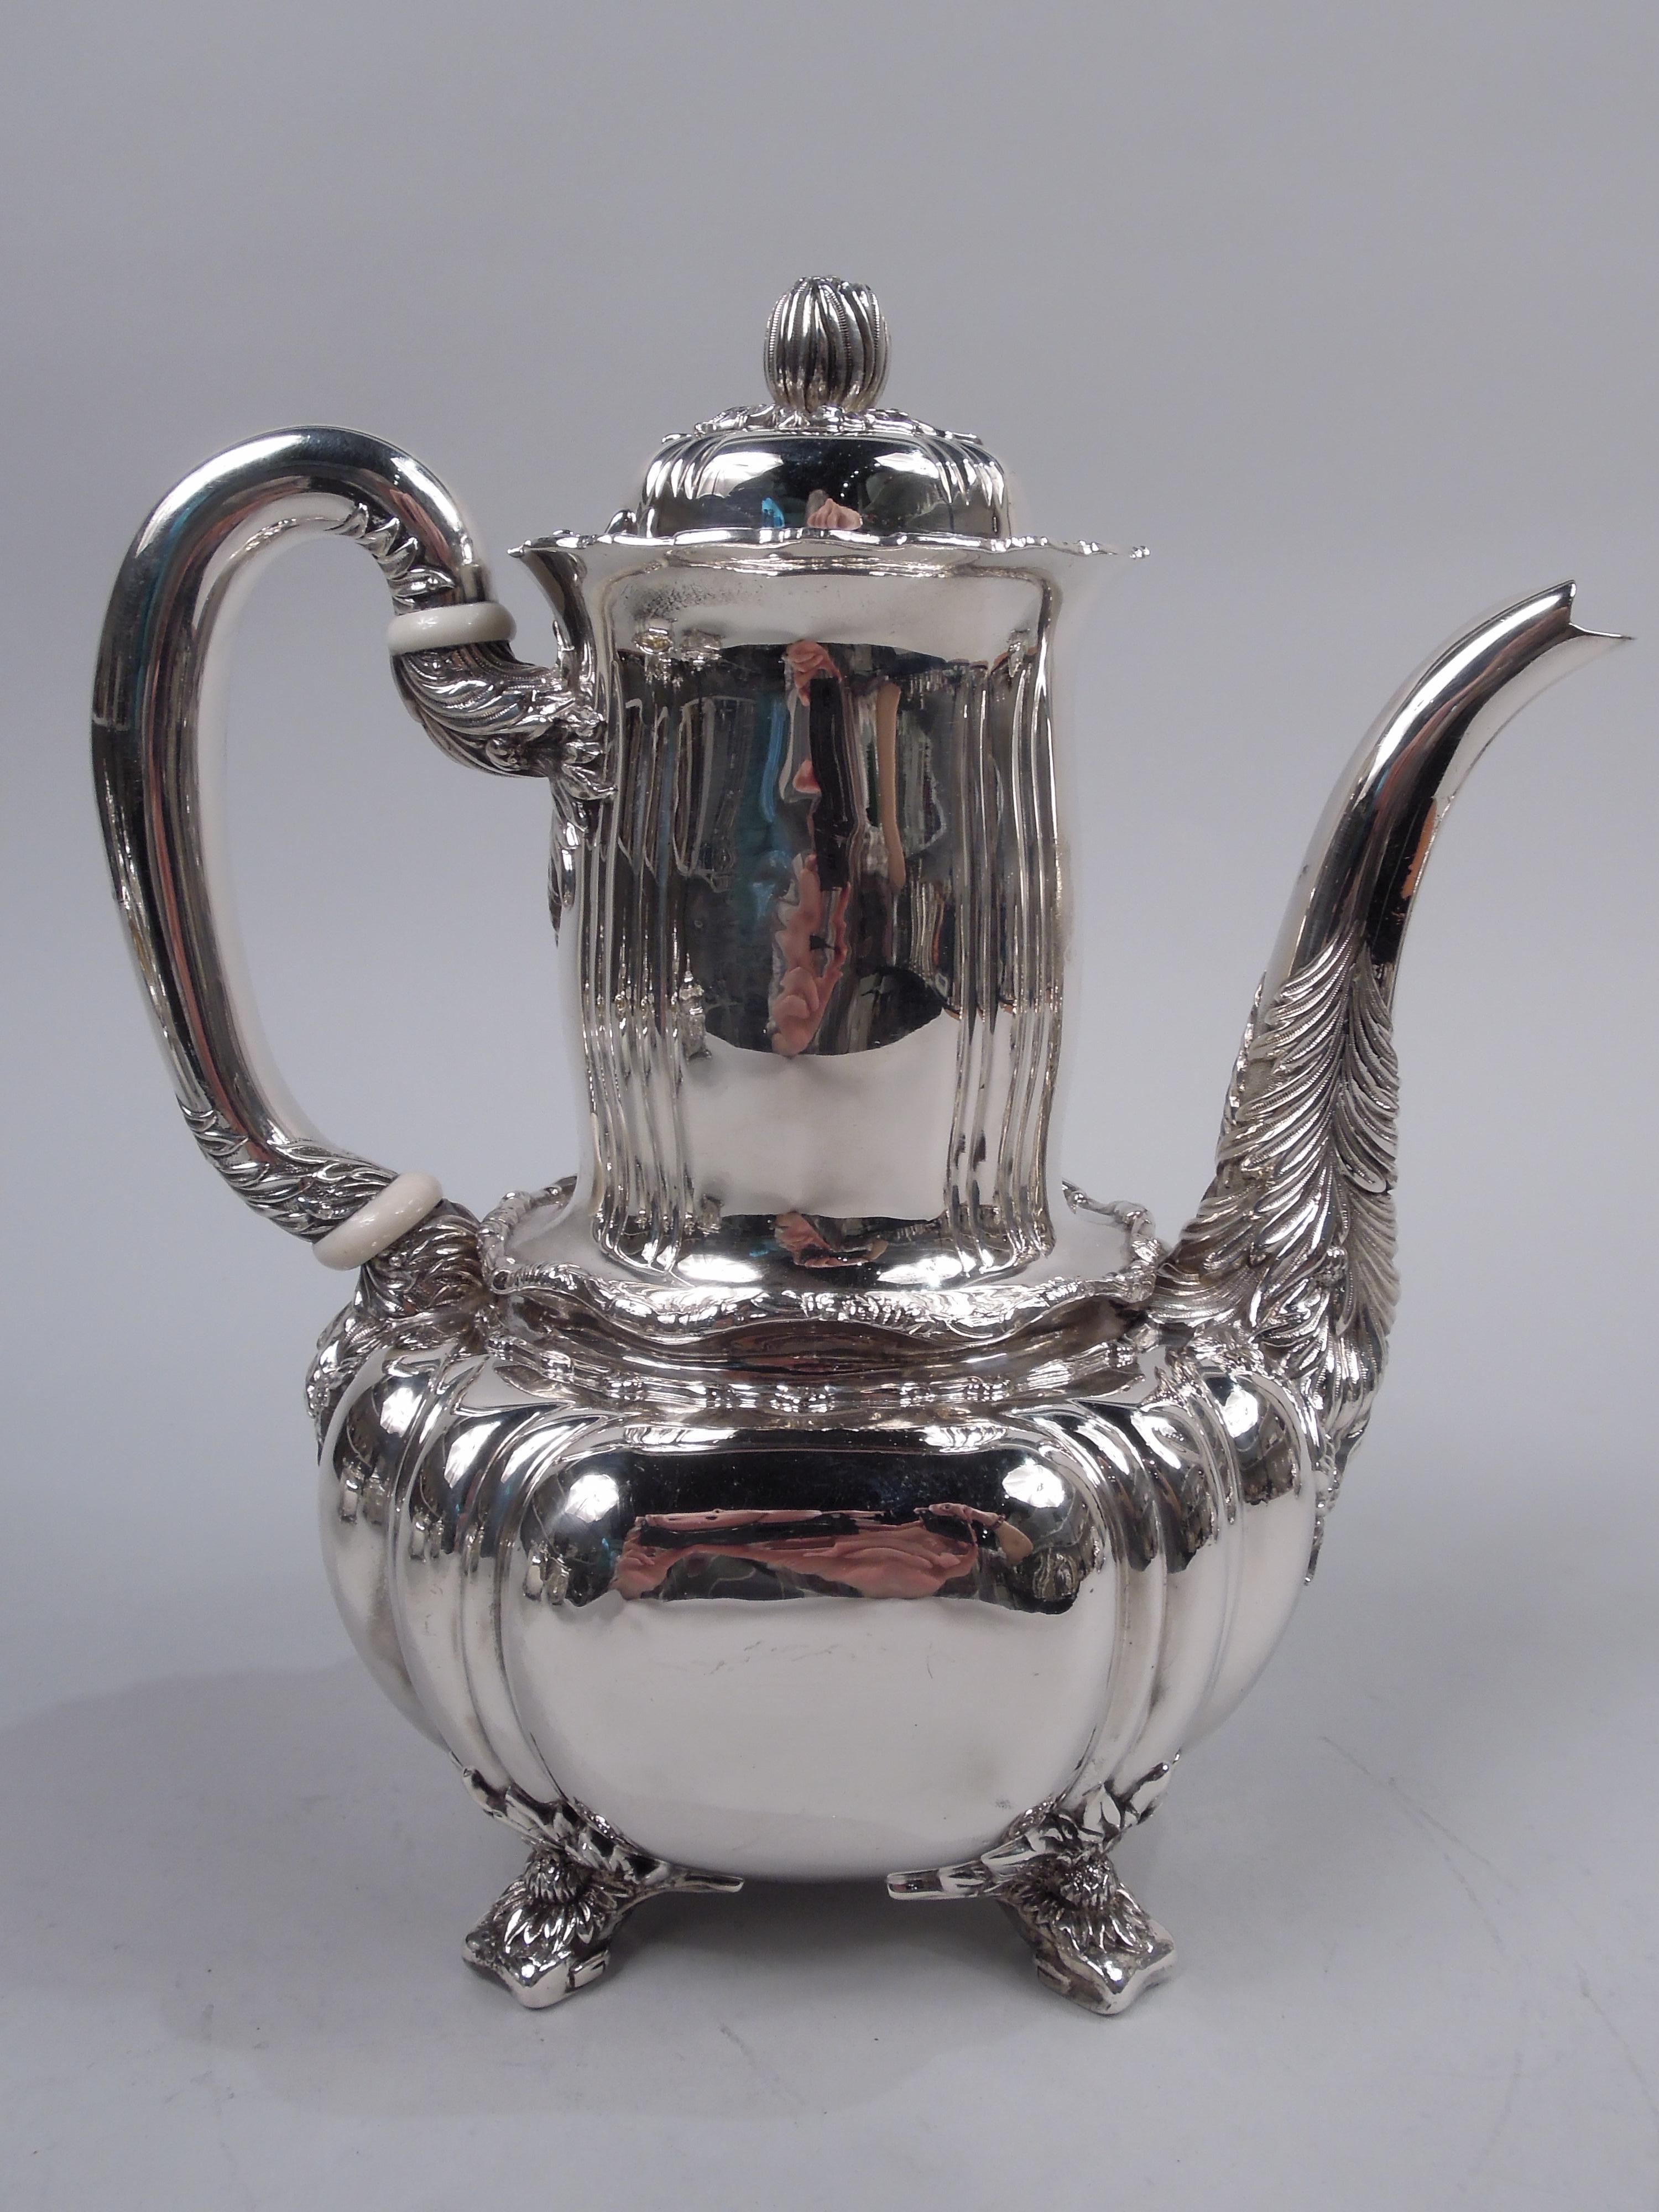  Fabulous Chrysanthemum sterling silver coffee and tea set. Made by Tiffany & Co. in New York. This set comprises 5 pieces: coffeepot, teapot, creamer, sugar, and waste bowl.
In the celebrated pattern that is an American interpretation of a Japanese